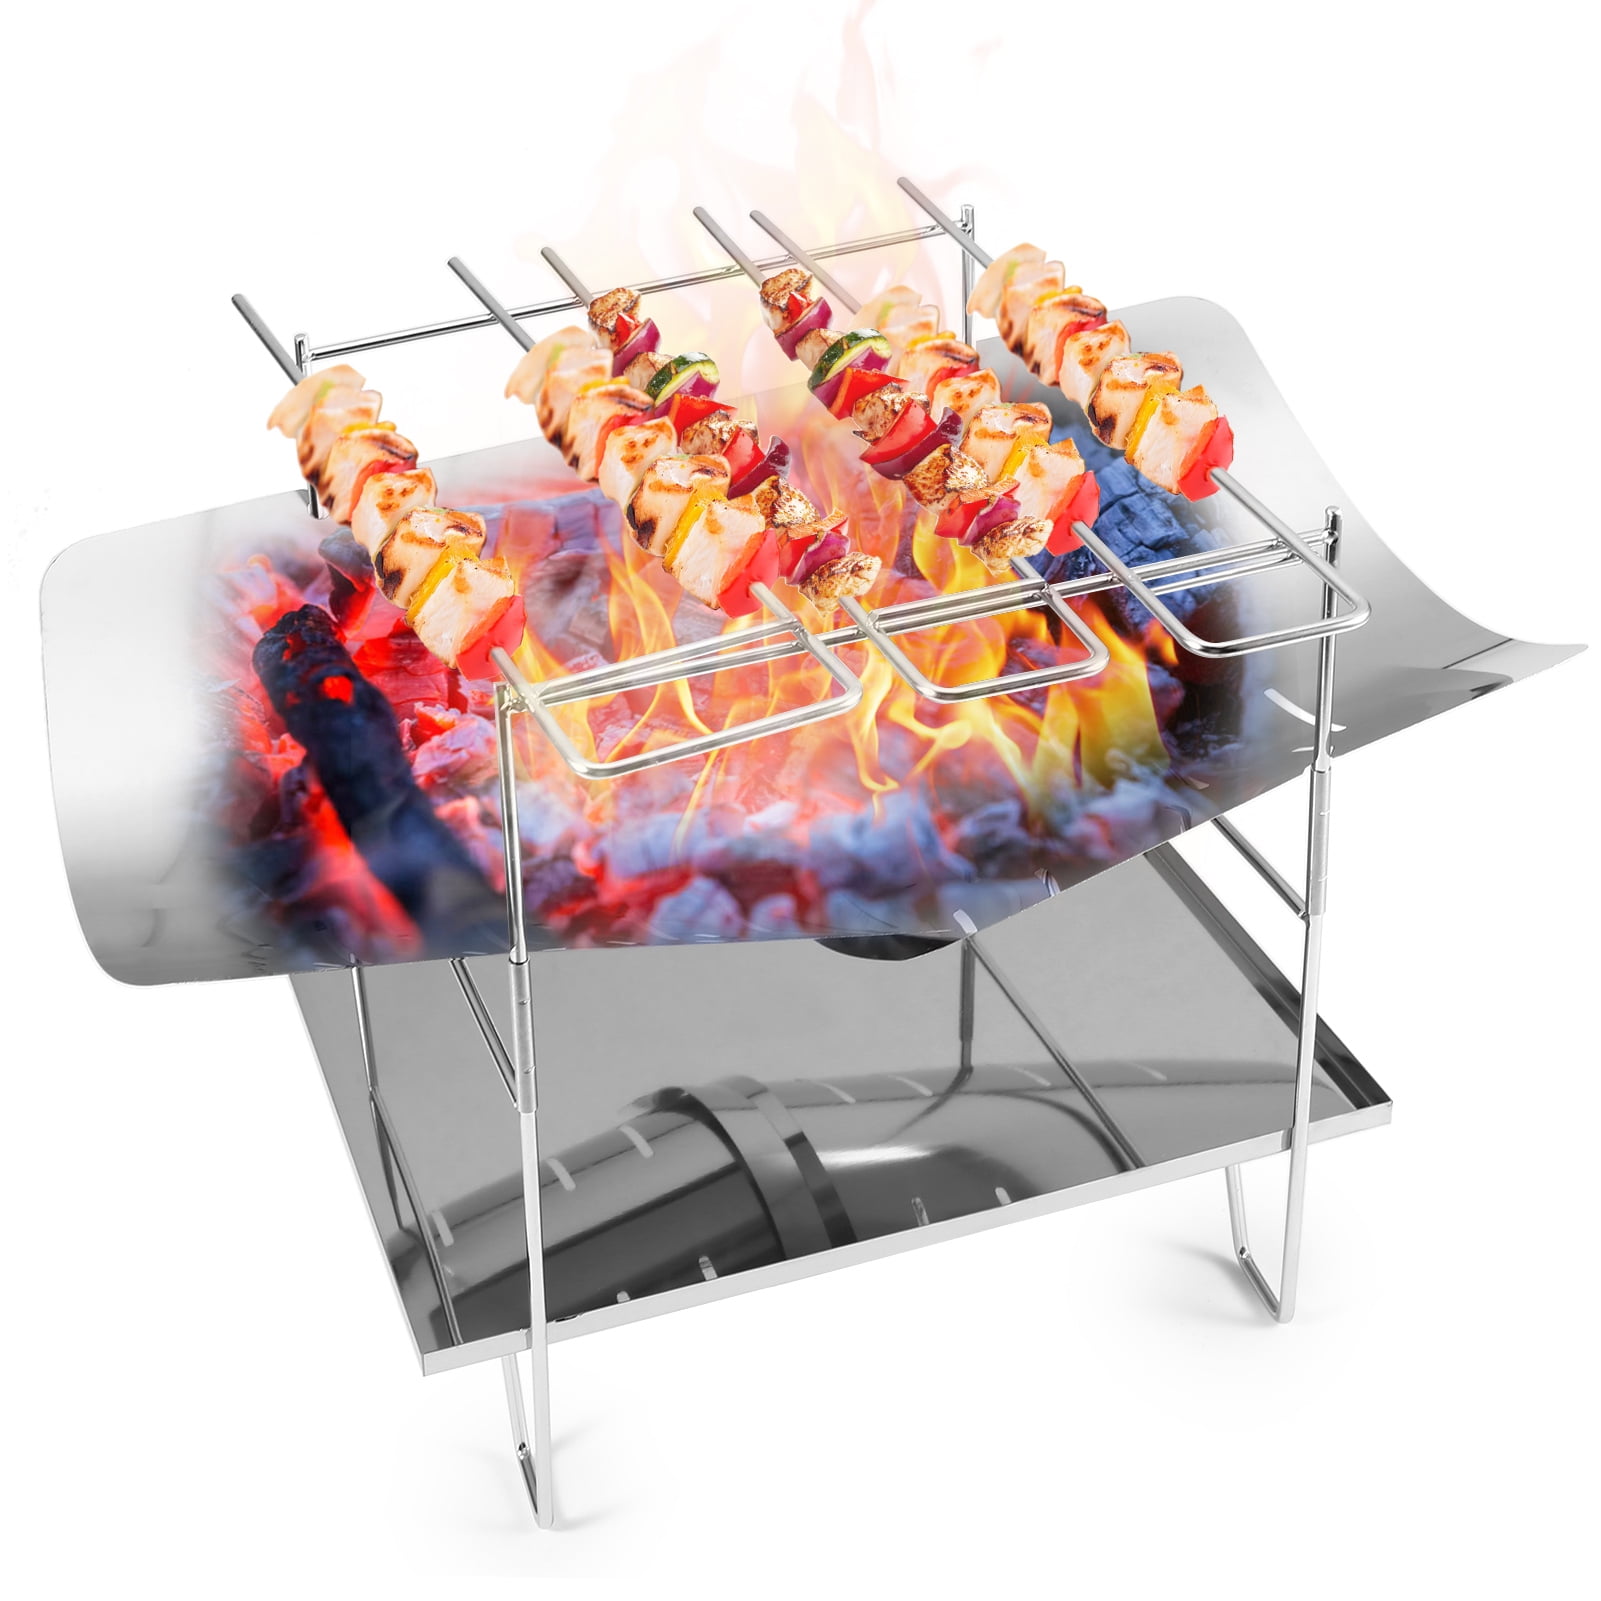 Stainless Steel Folding Barbecue Grill Firewood Stand forOutdoor Camping Hunting 